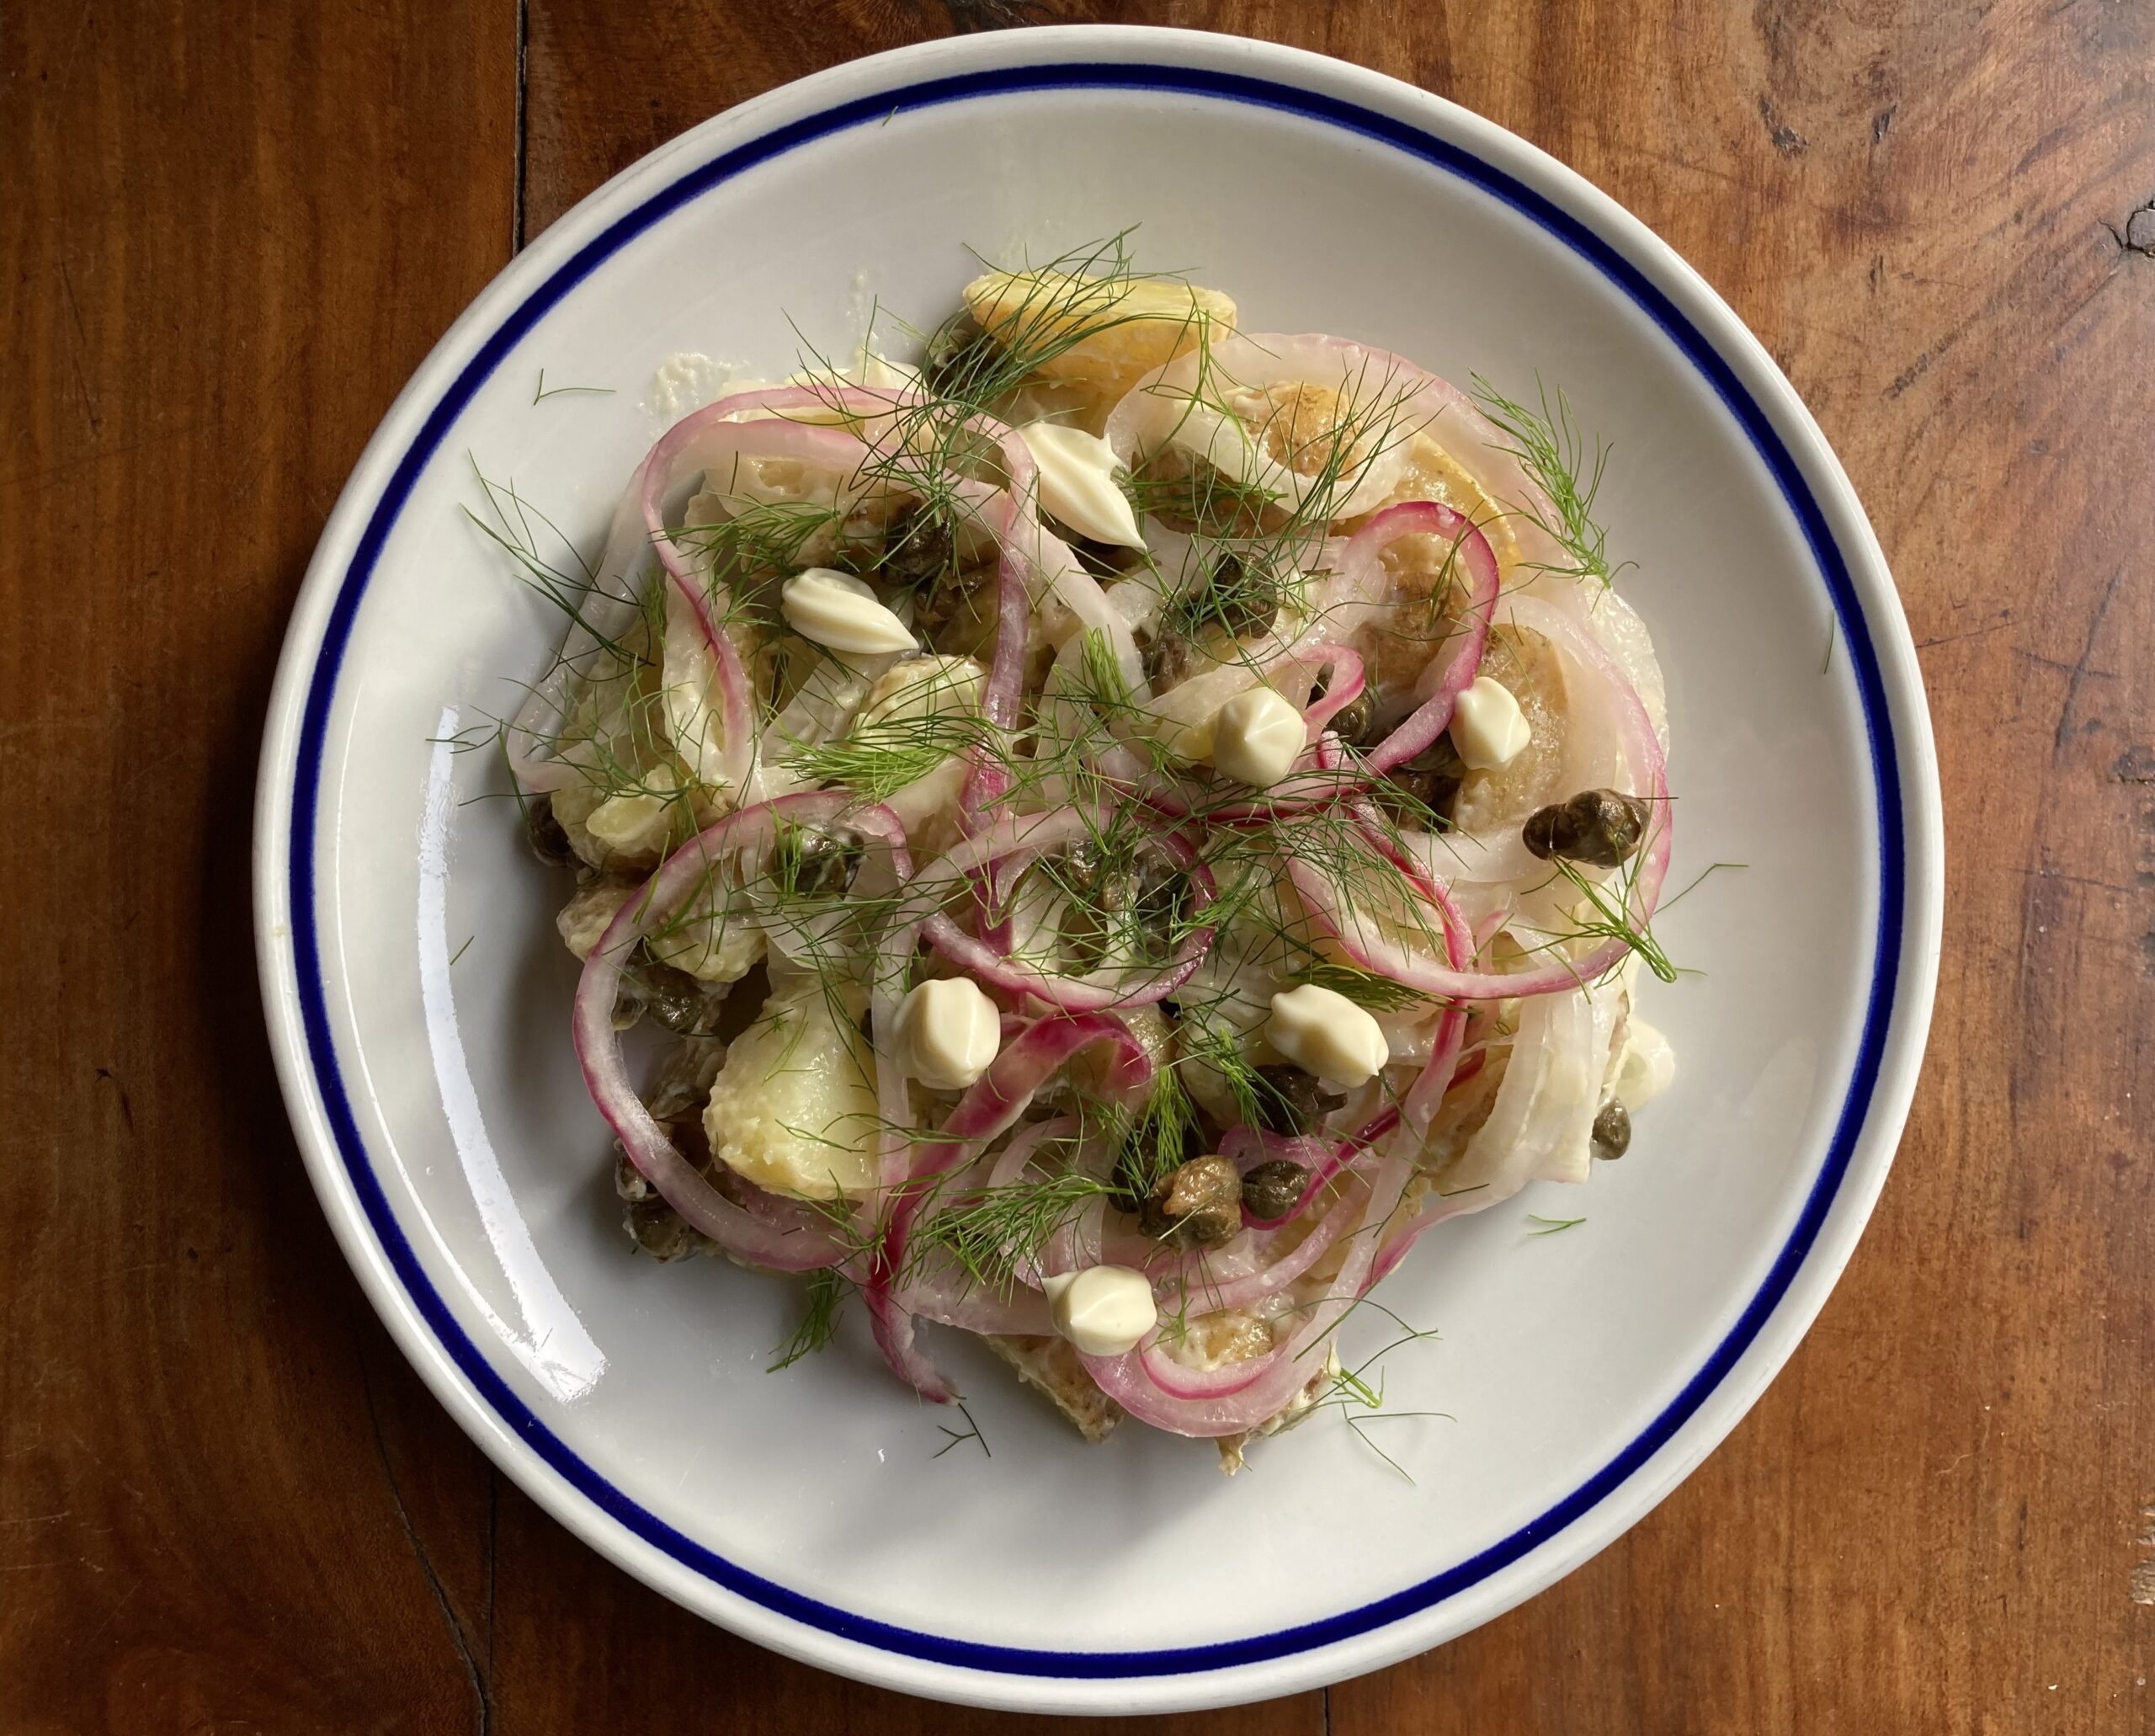 A white ceramic plate on wooden table surface, layer with wedges of potatoes, pickled red onions, capers, dollops of mayonnaise, and fresh fennel fronds.